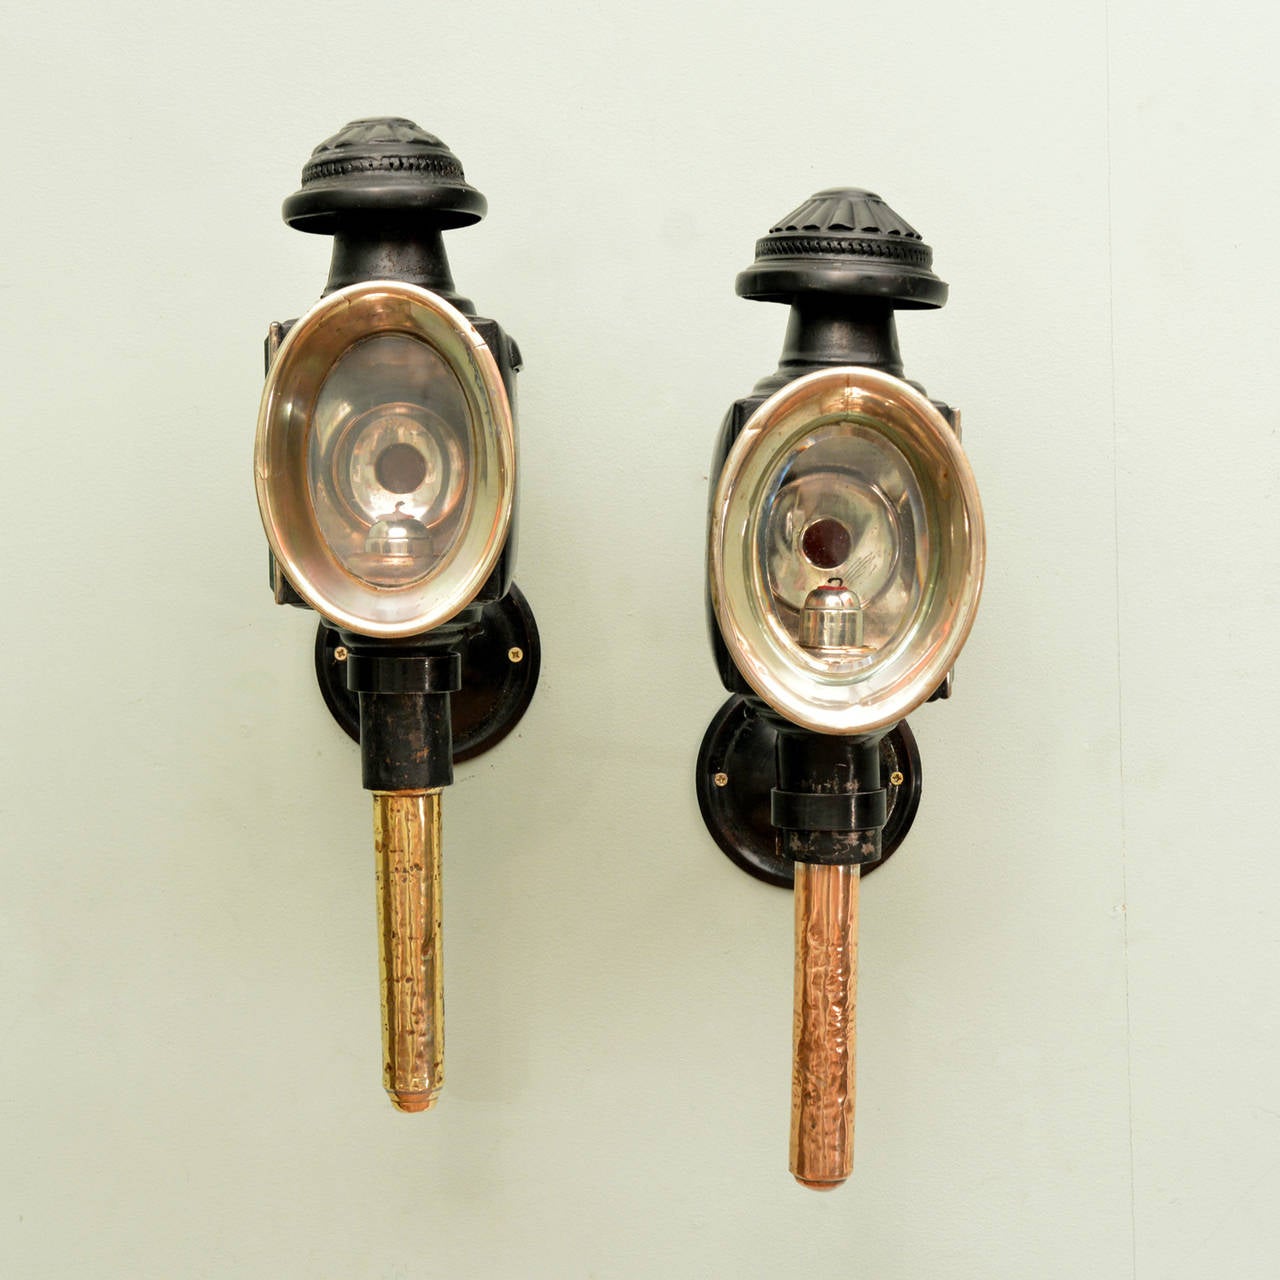 A pair of carriage lanterns by F. W, Constable, coach and carriage builders of Cirencester and Fairford, circa 1900.  Painted tin and nickel plated copper.  

Available to view at Brunswick House.